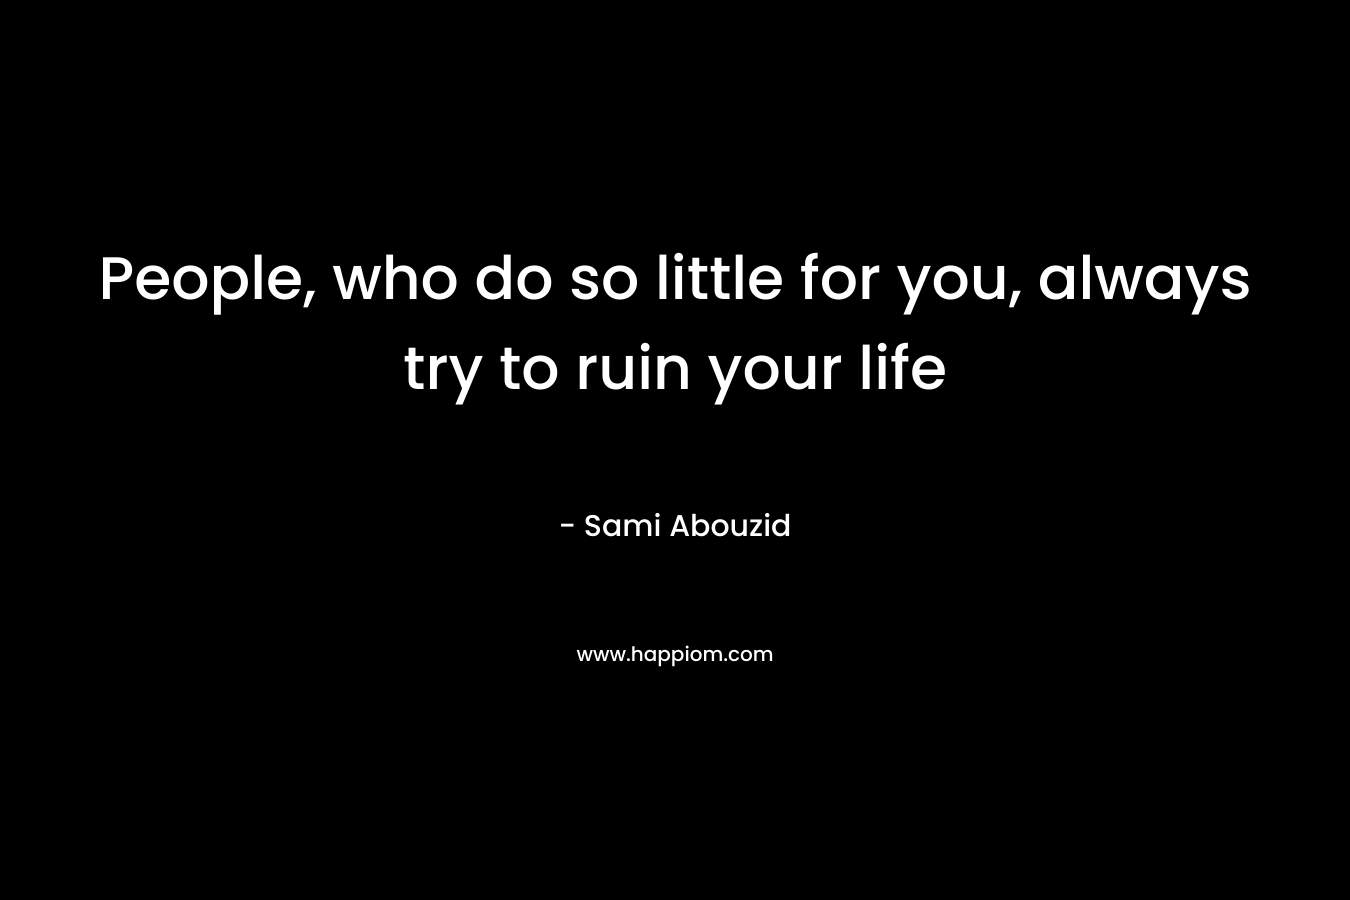 People, who do so little for you, always try to ruin your life